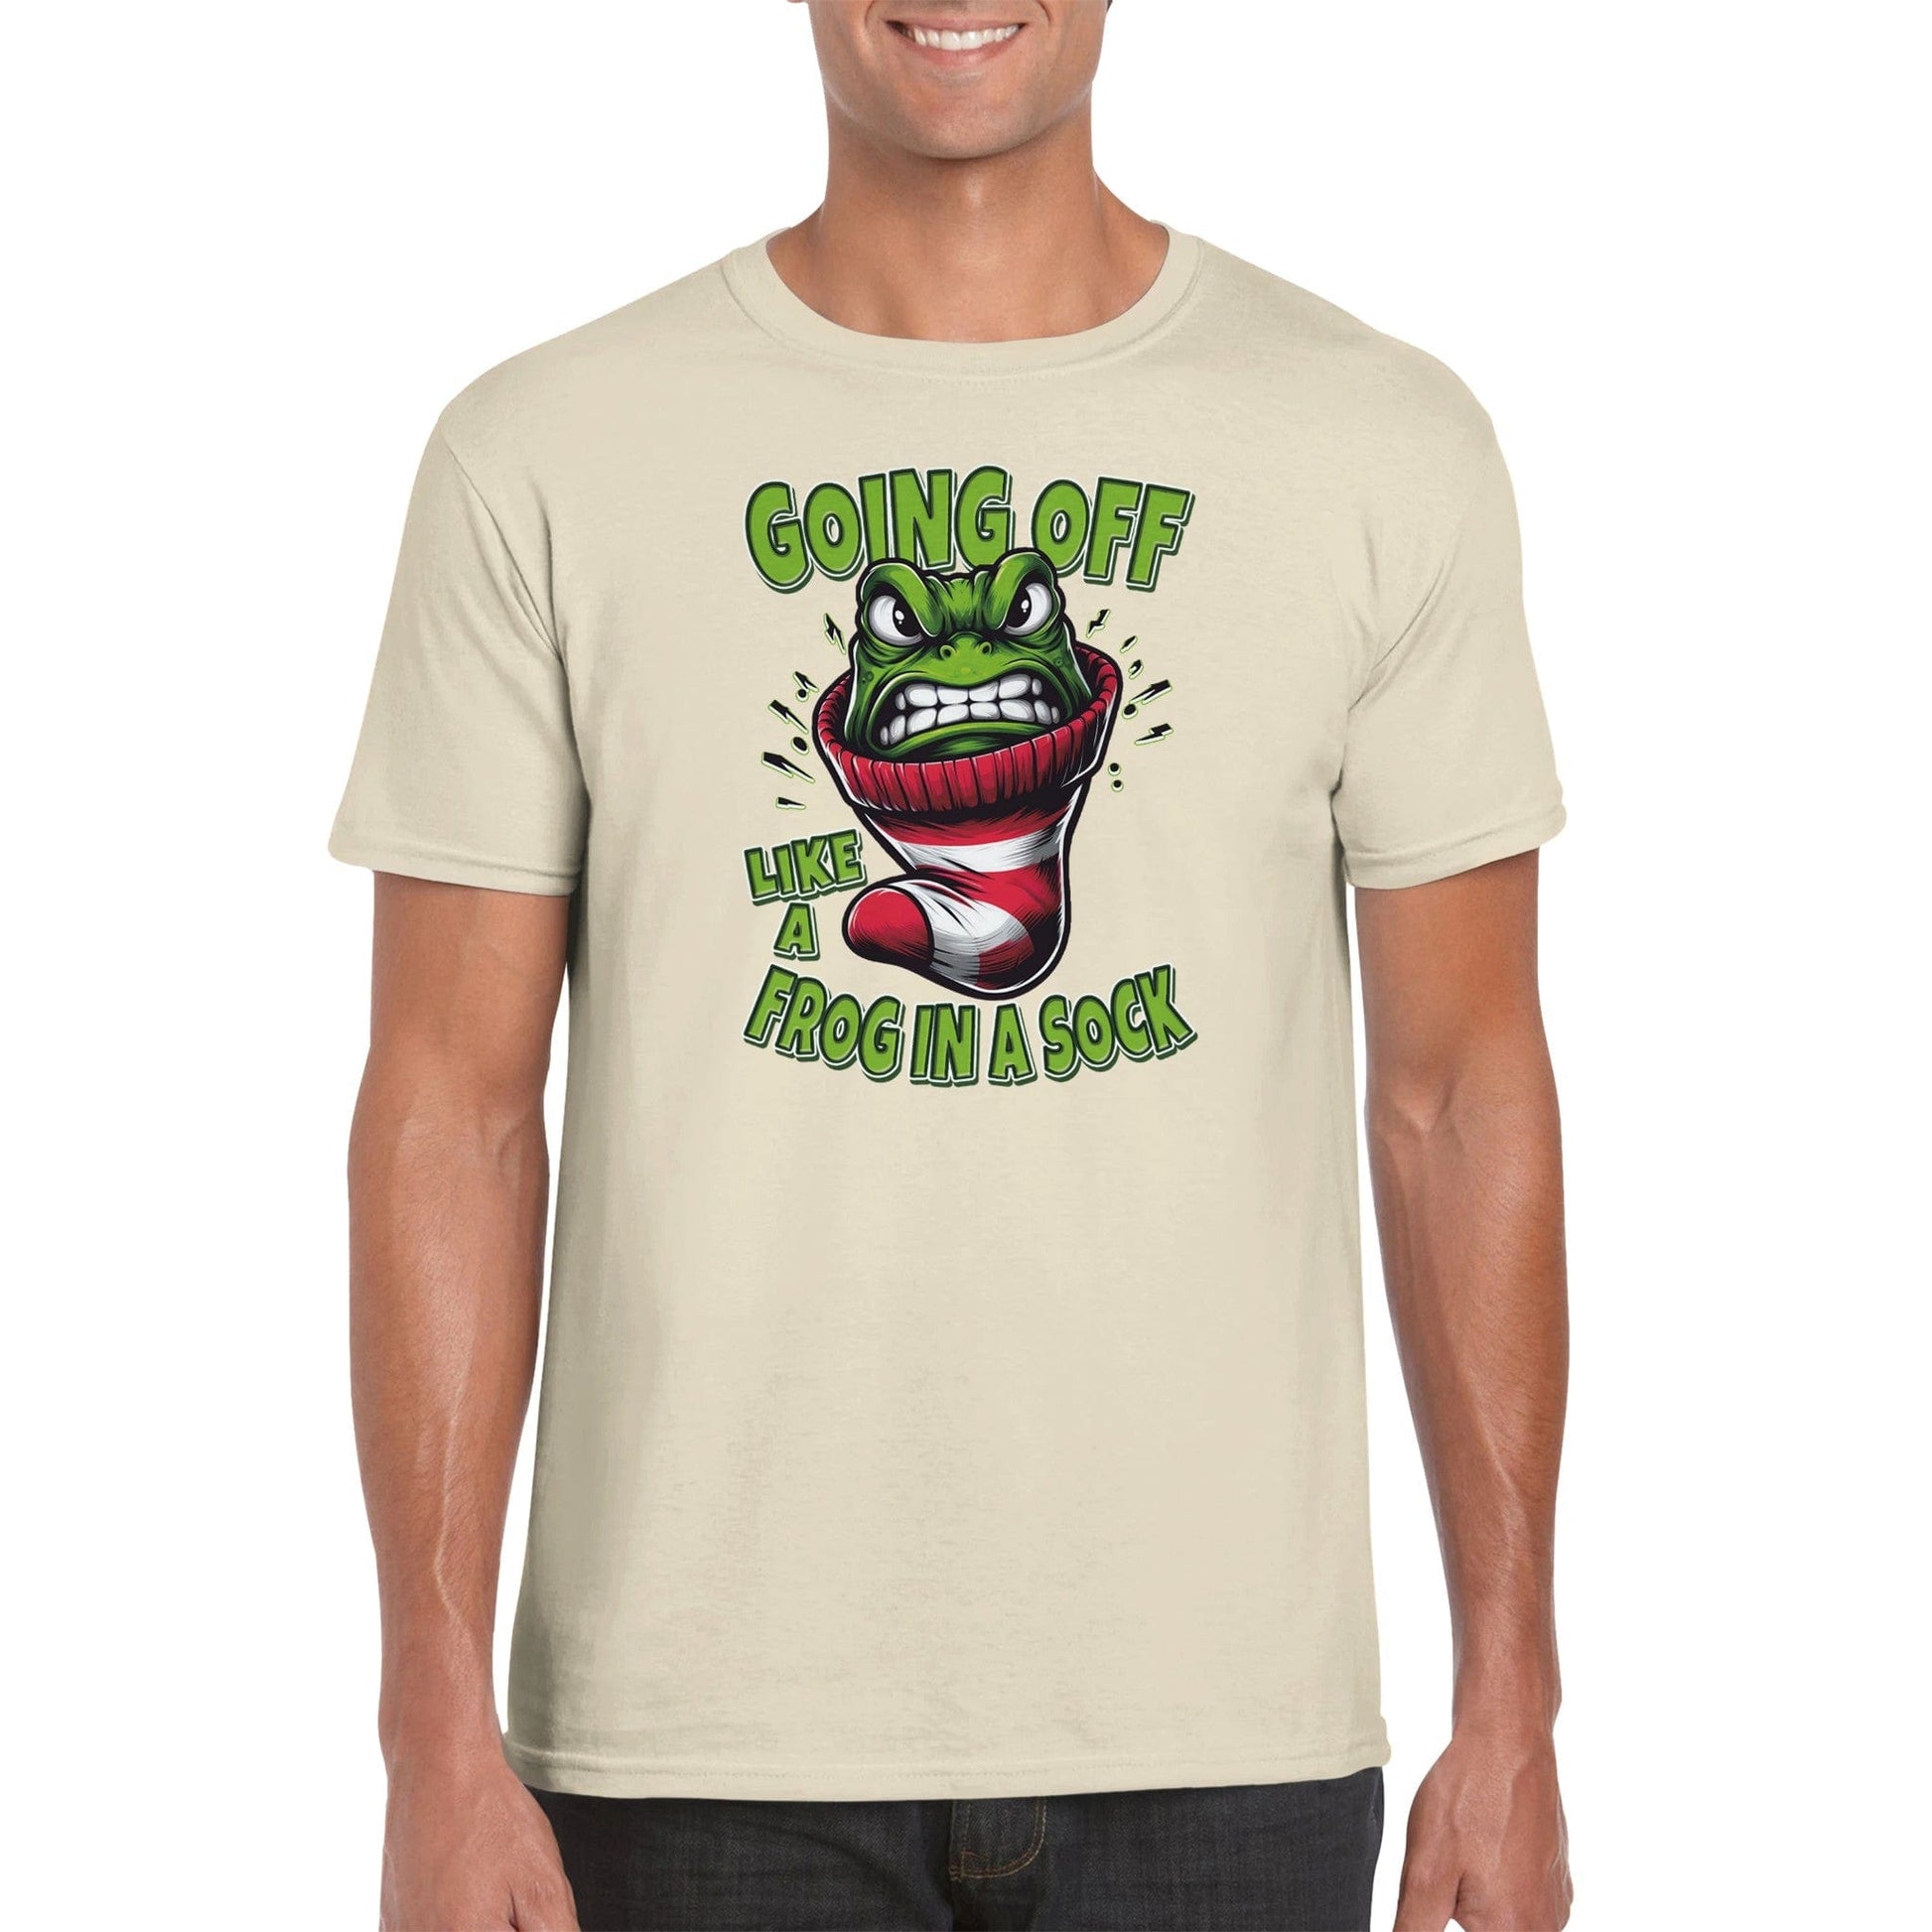 Like A Frog In A Sock T-shirt Graphic Tee Australia Online